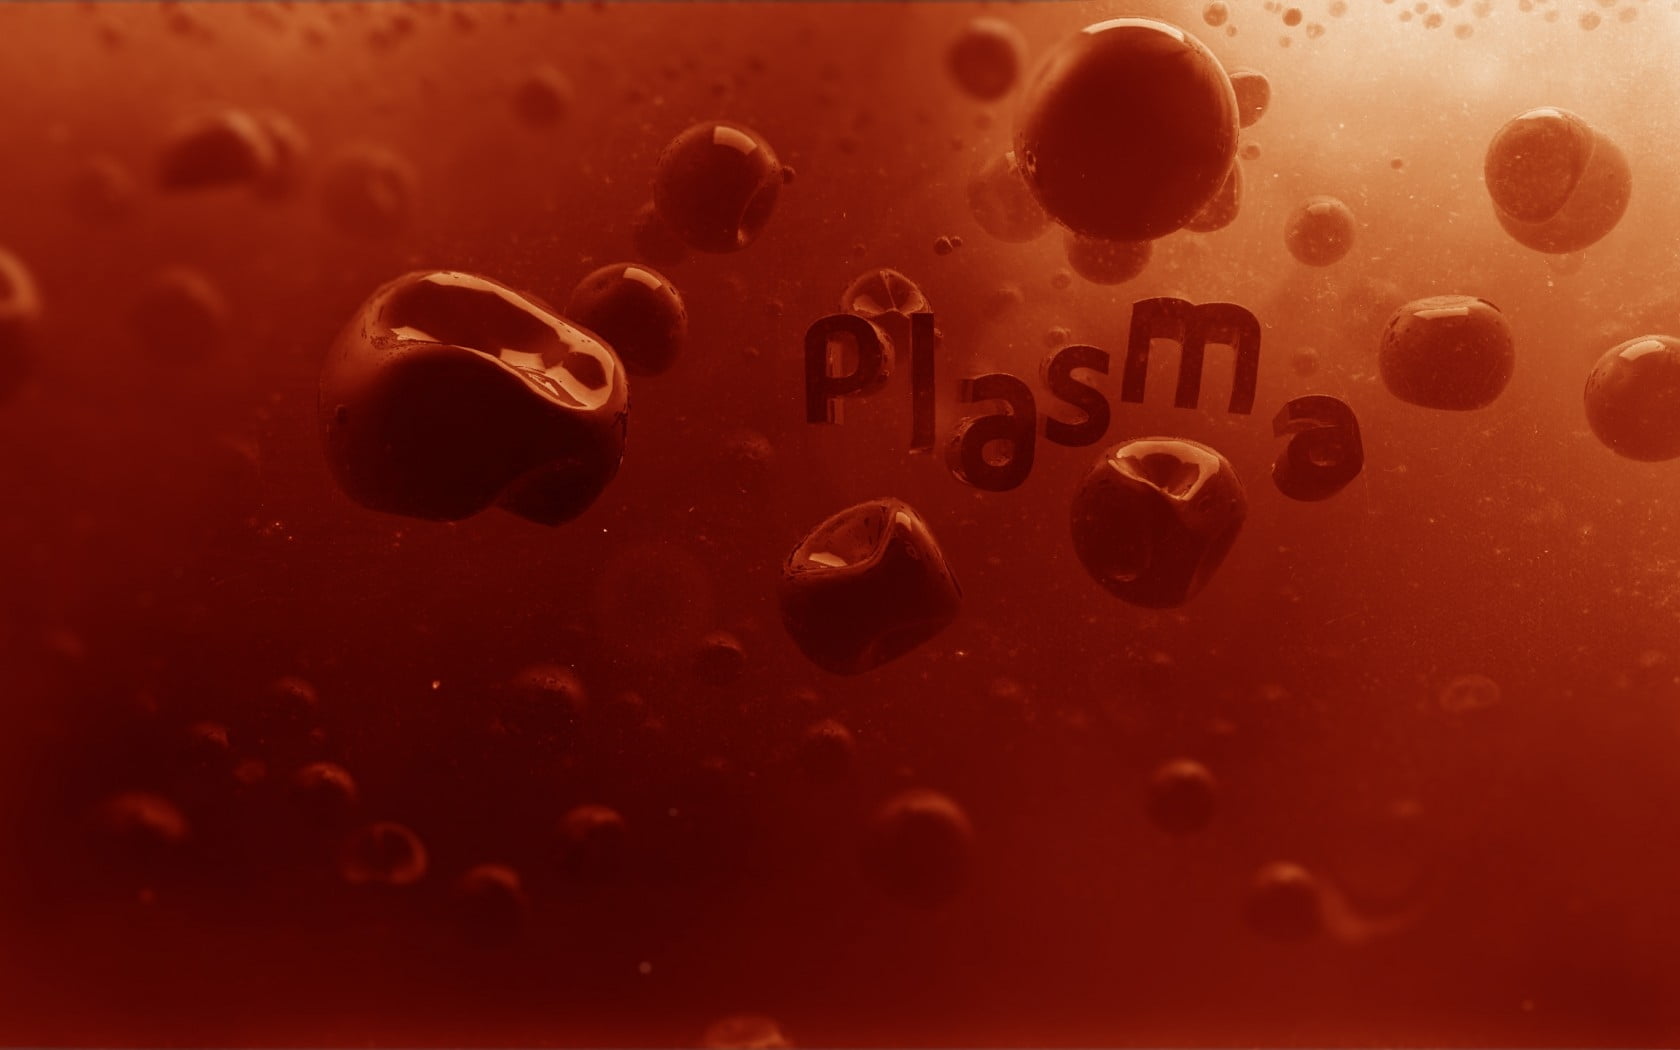 Plasma text with red blood cells